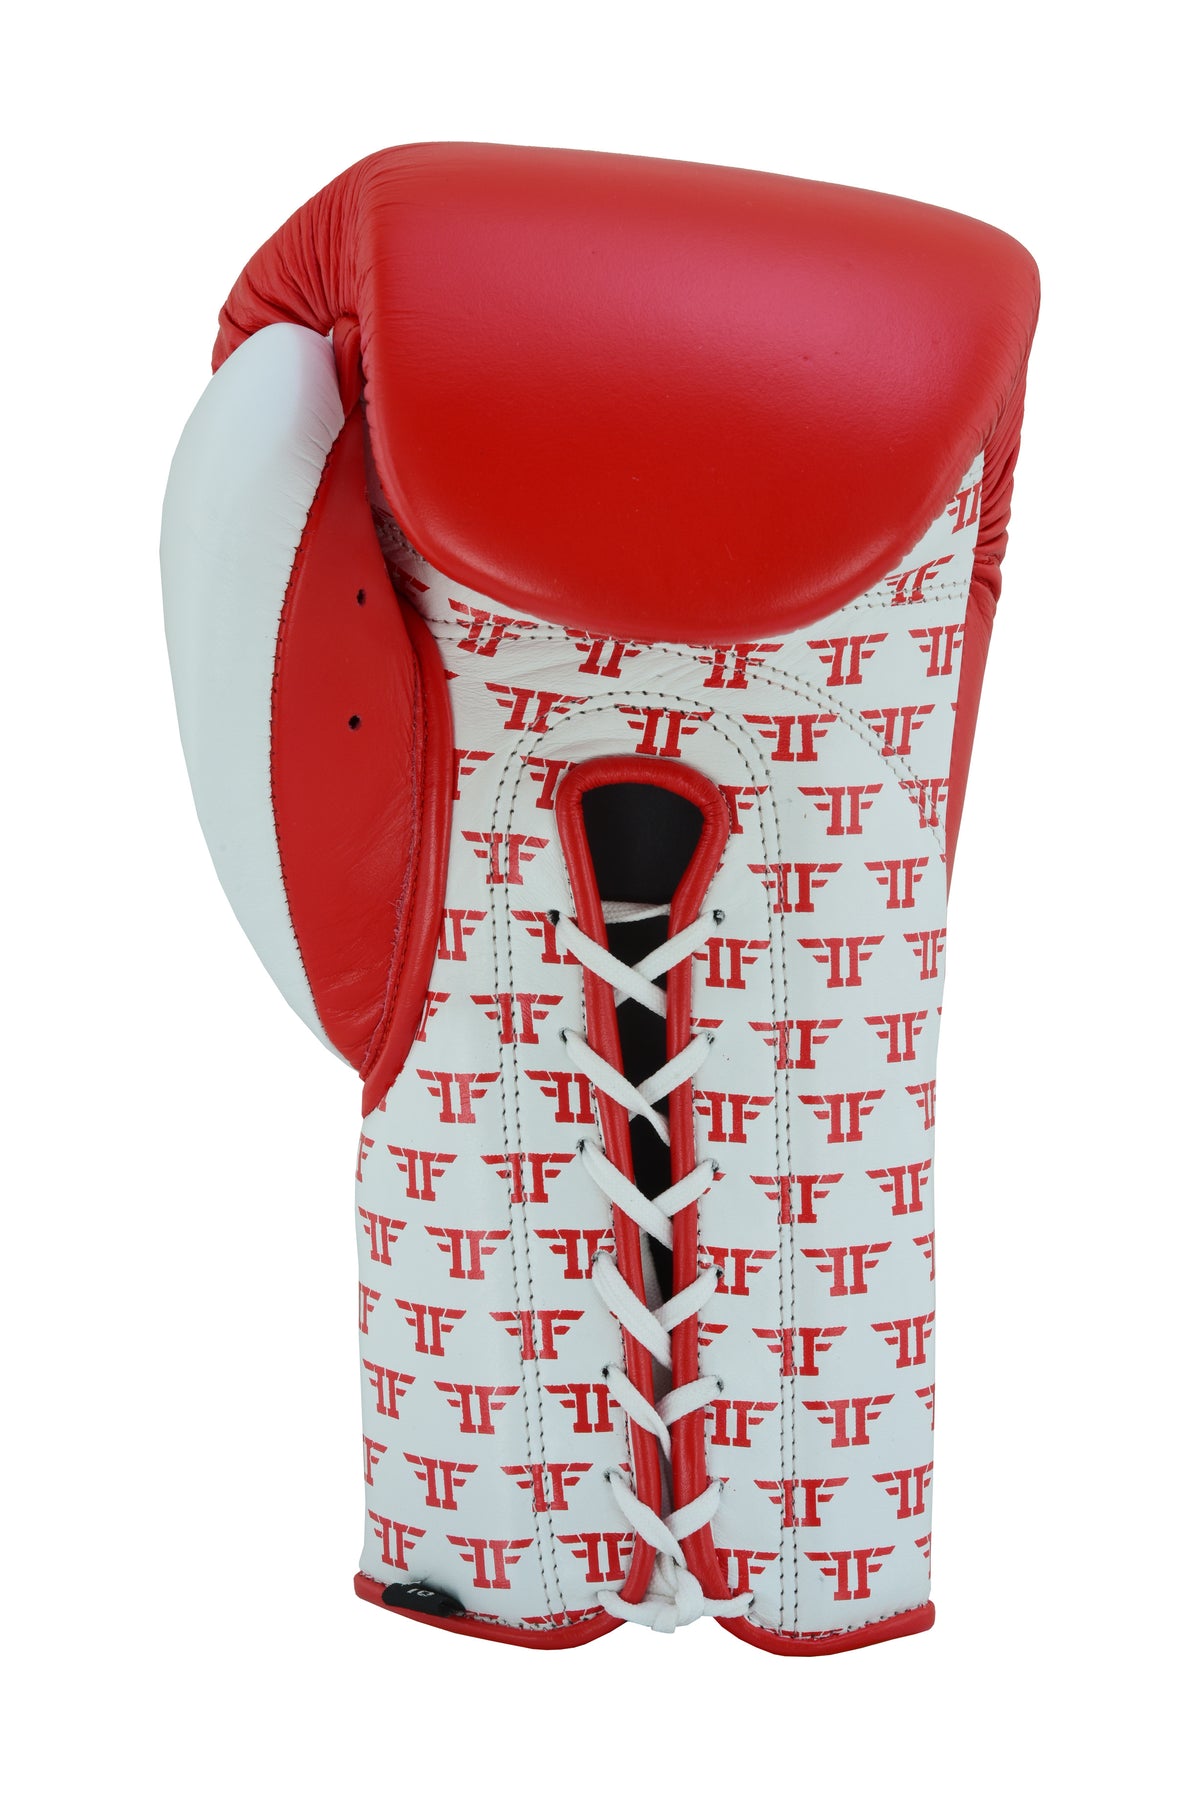 SUPERSLICK LACEUP TRAINING/SPARRING GLOVE